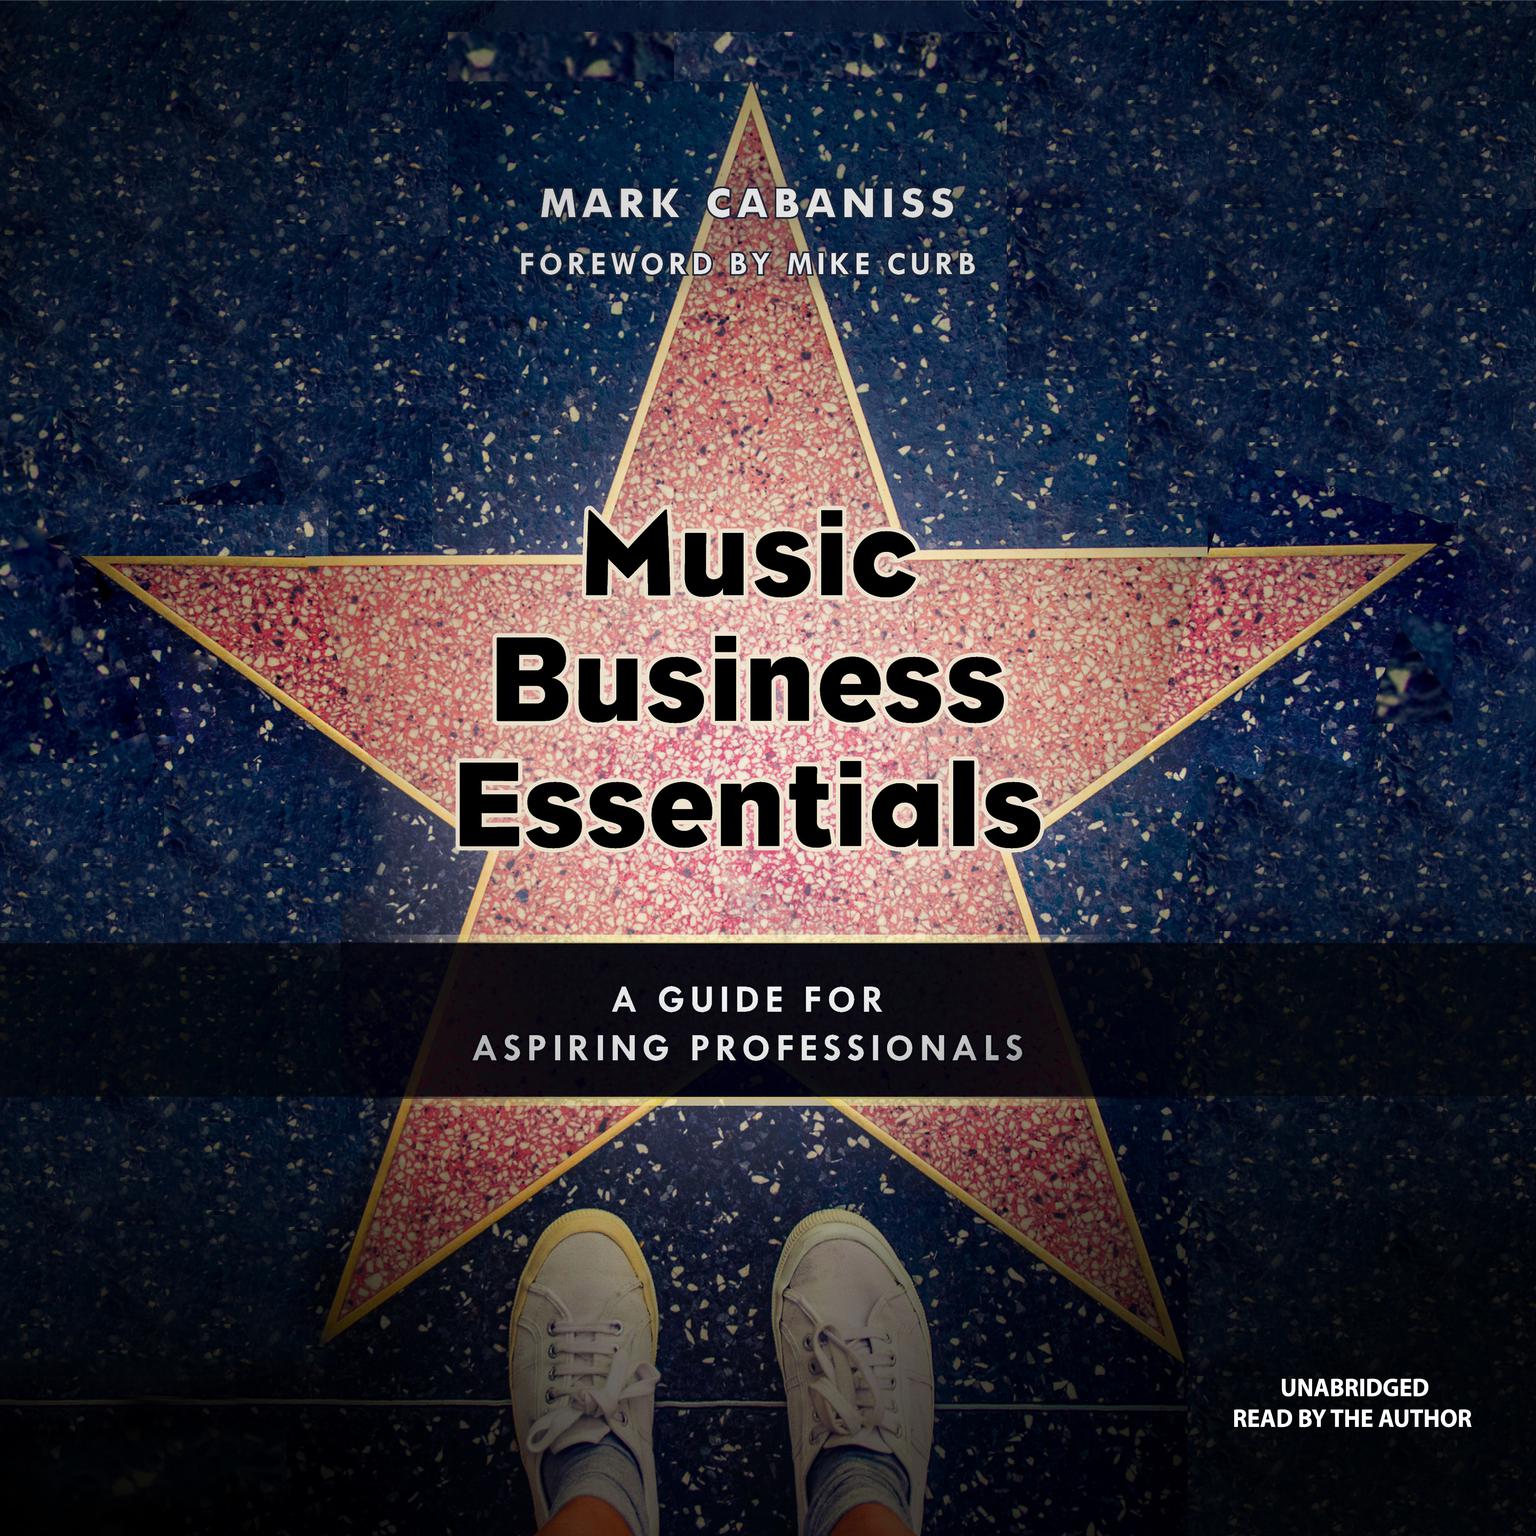 Music Business Essentials: A Guide for Aspiring Professionals Audiobook, by Mark Cabaniss